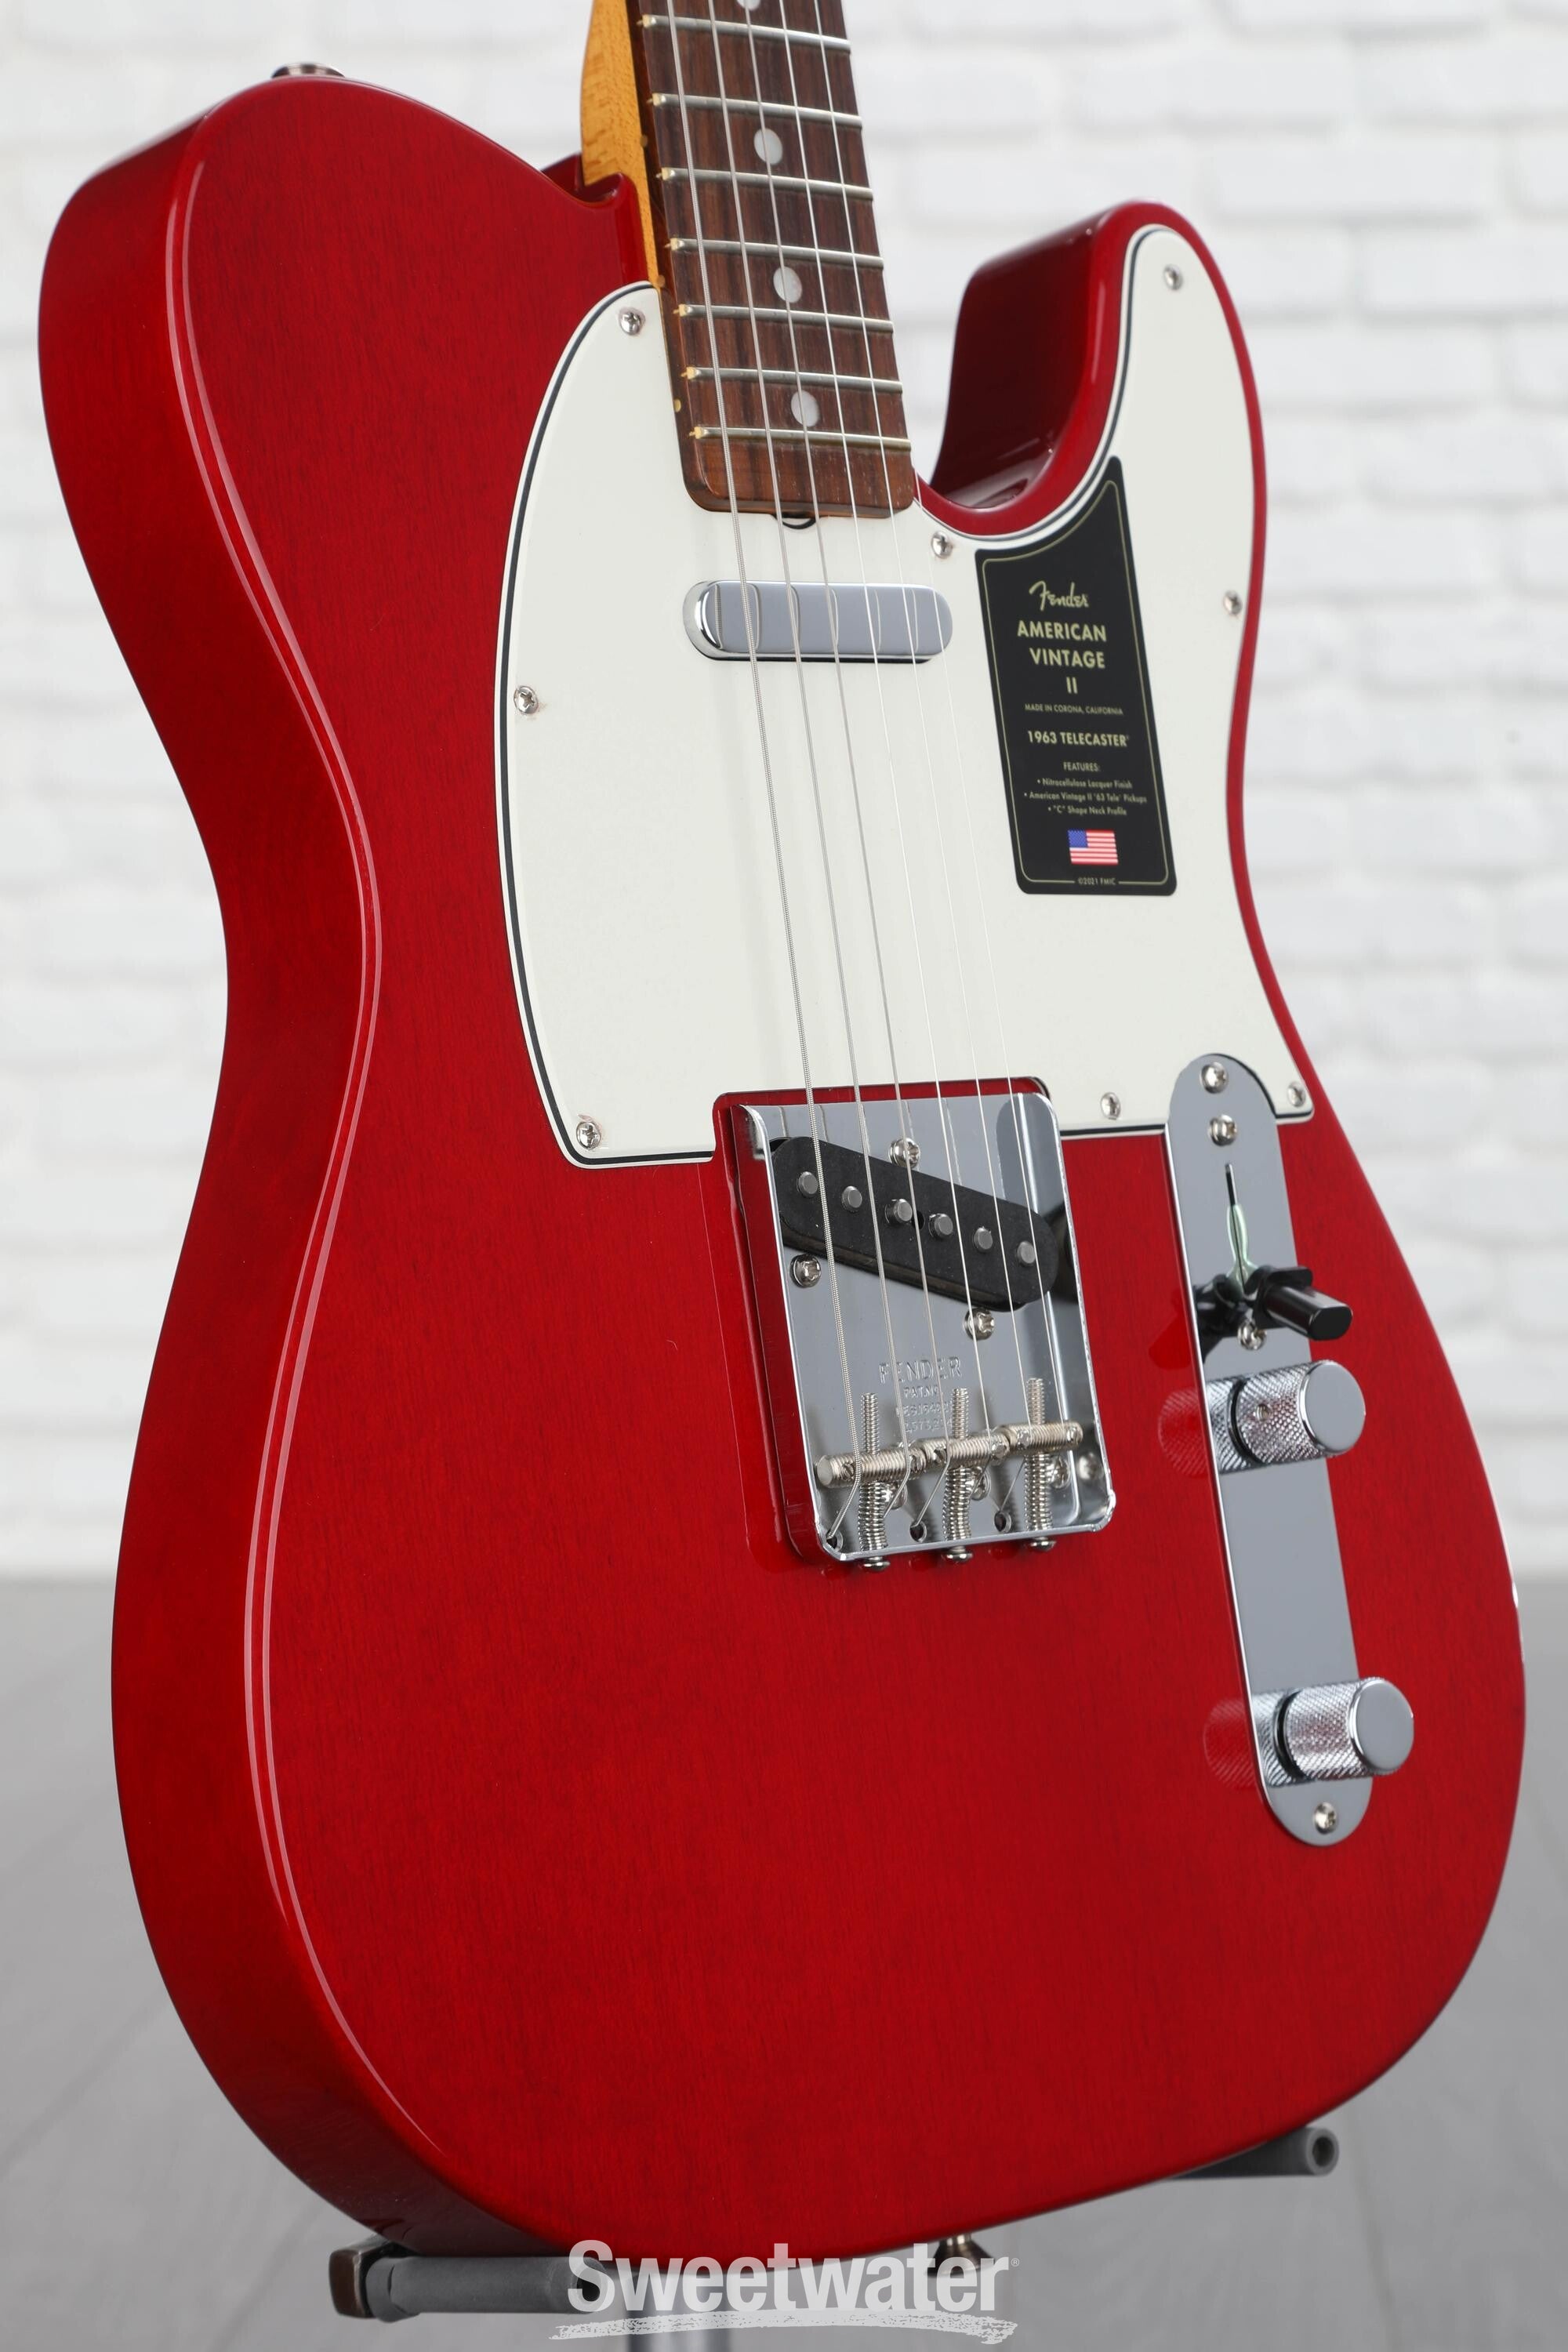 American Vintage II 1963 Telecaster Electric Guitar - Red